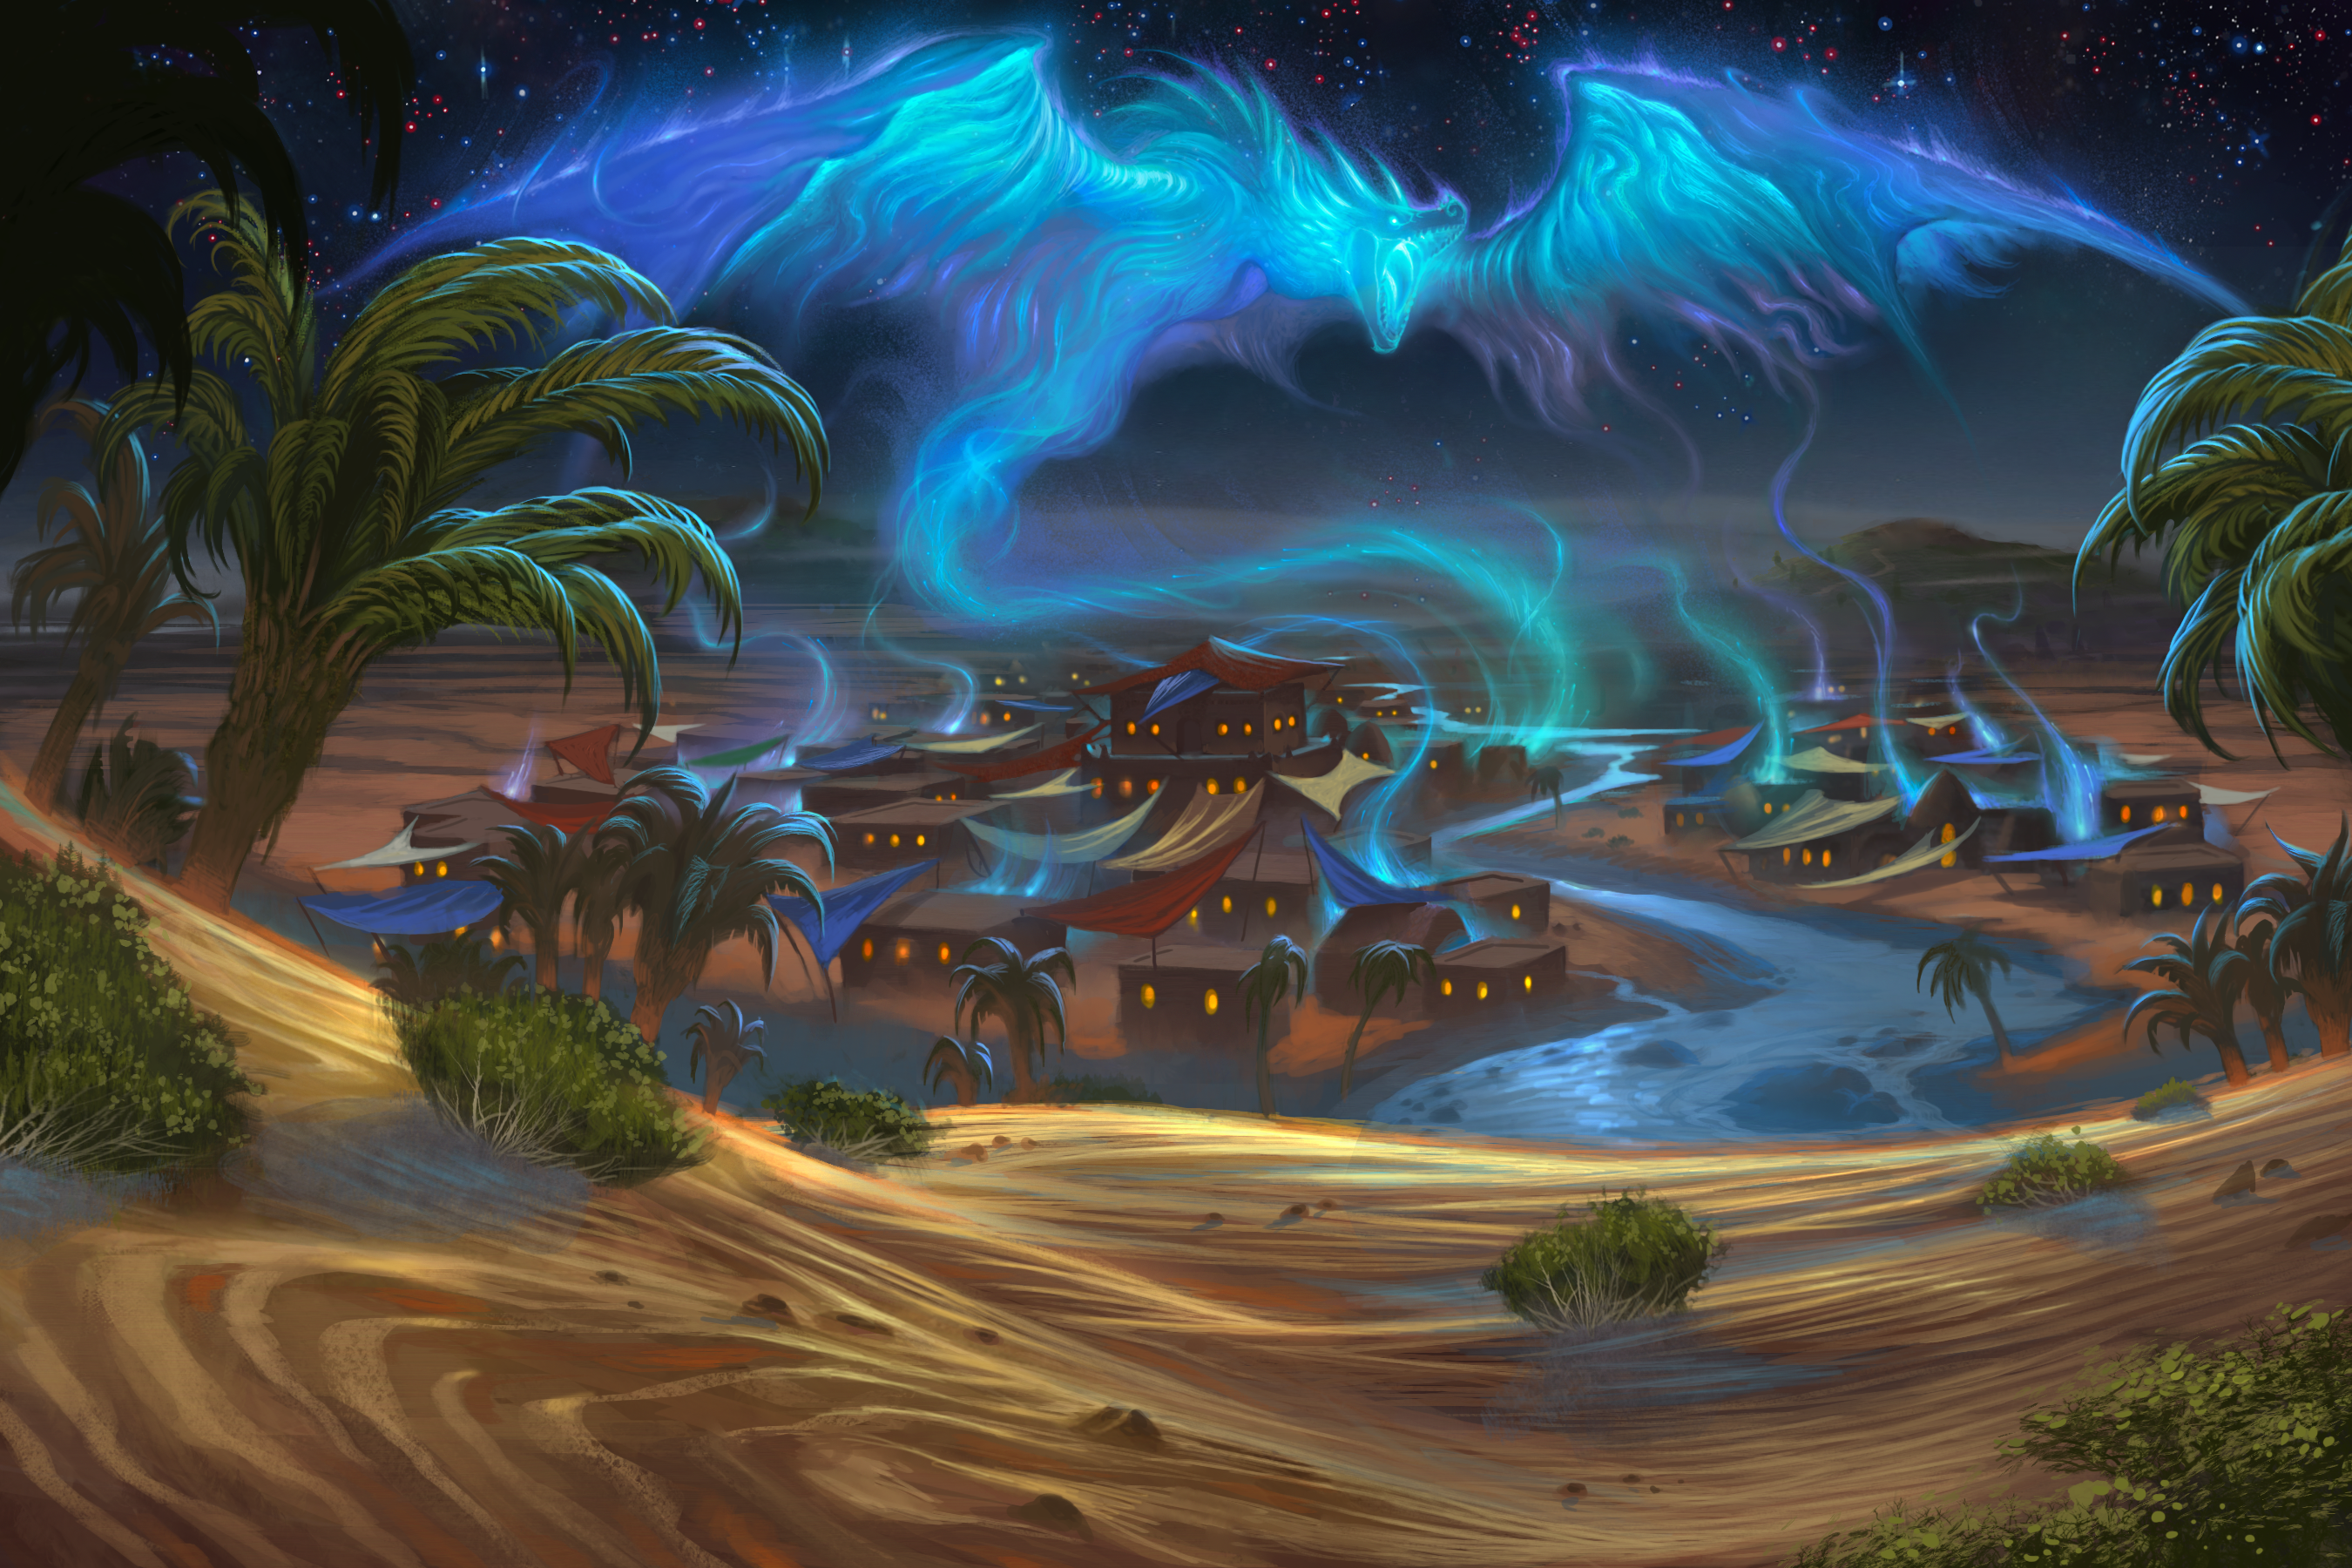 the city of Zantir, built around a lively river, sits under the large glowing shape of a roaring dragon